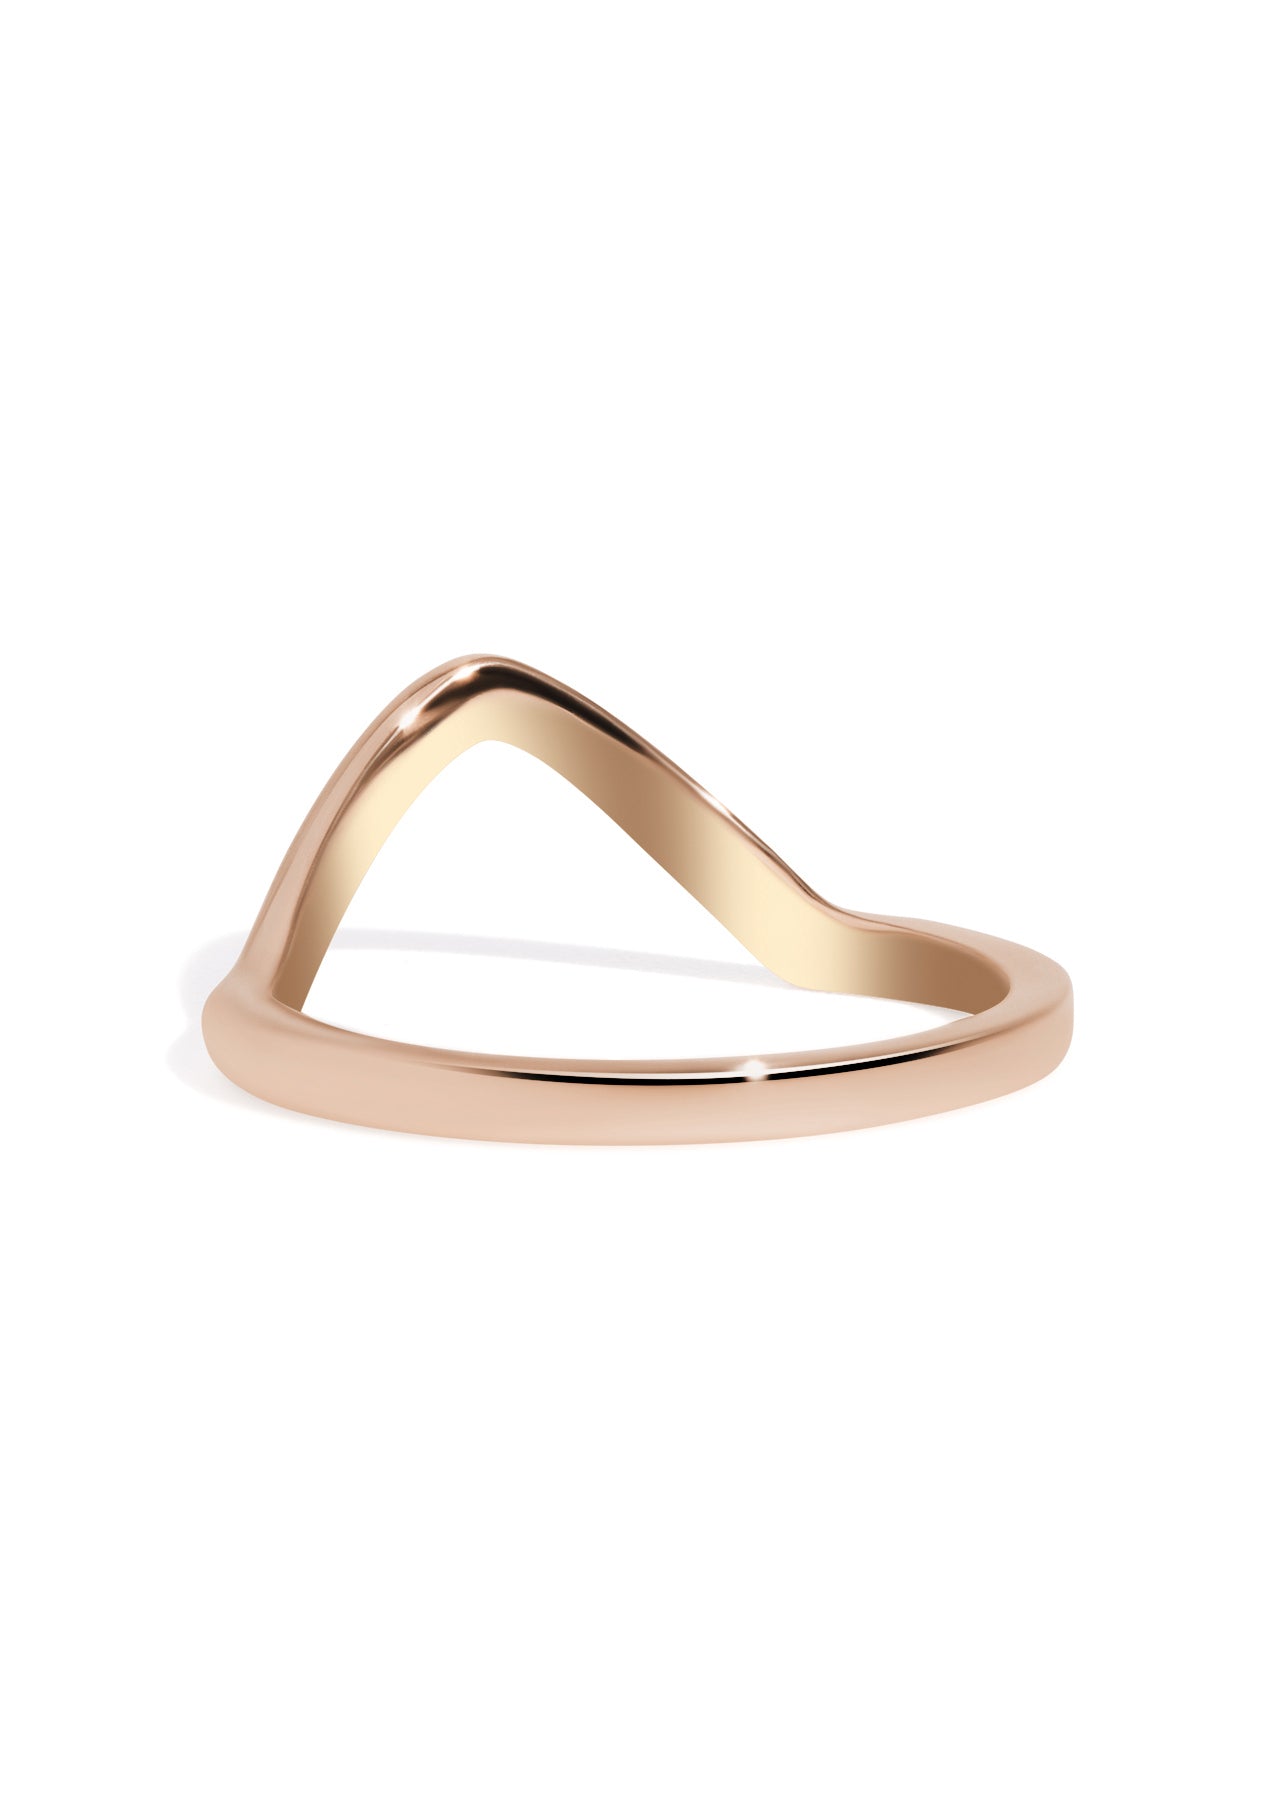 The Spire Rose Gold Band